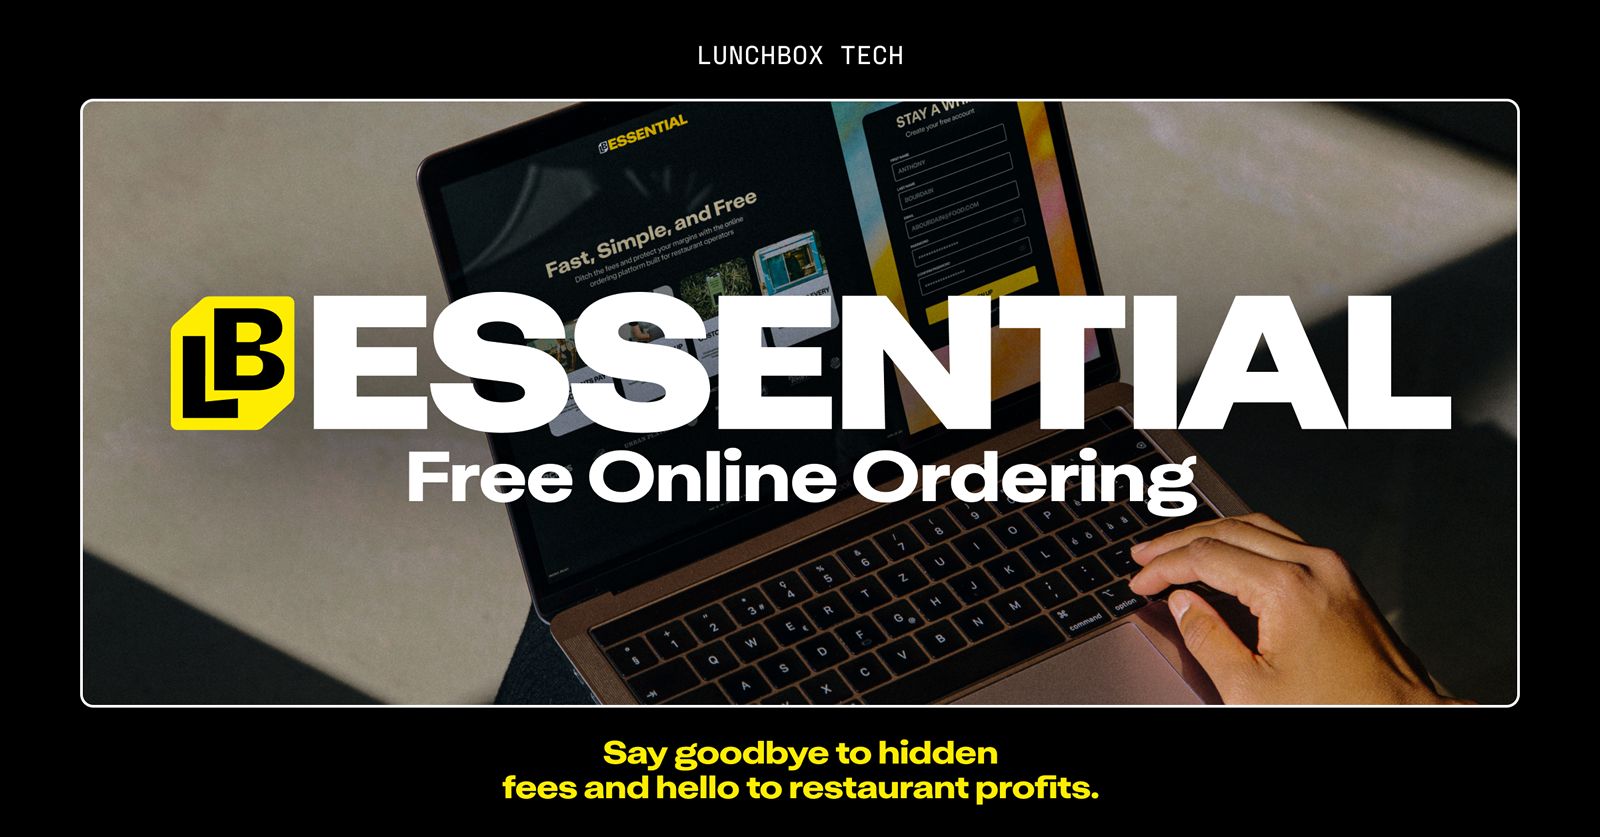 Lunchbox Launches a Free Online Ordering Platform To Save Mom & Pop Restaurant Operators Across the Country